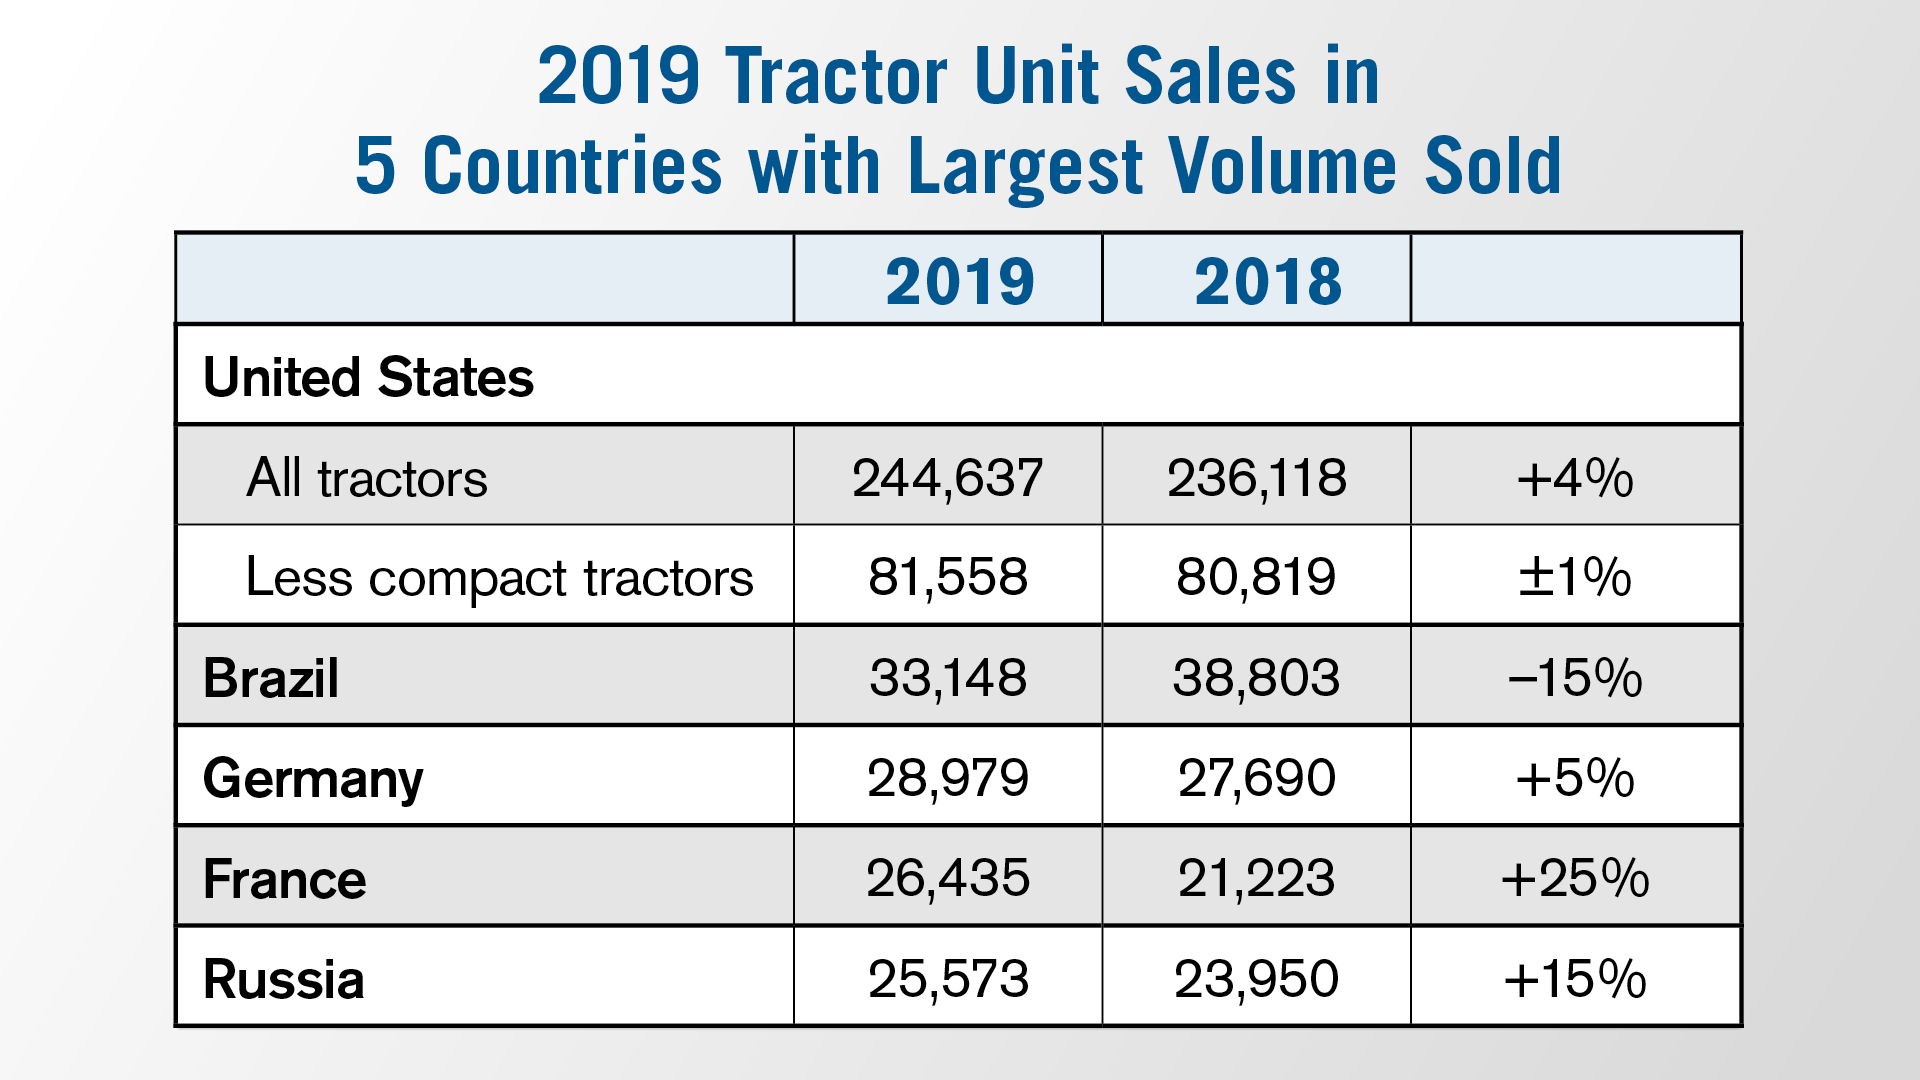 Global Tractor Sales on the Rise